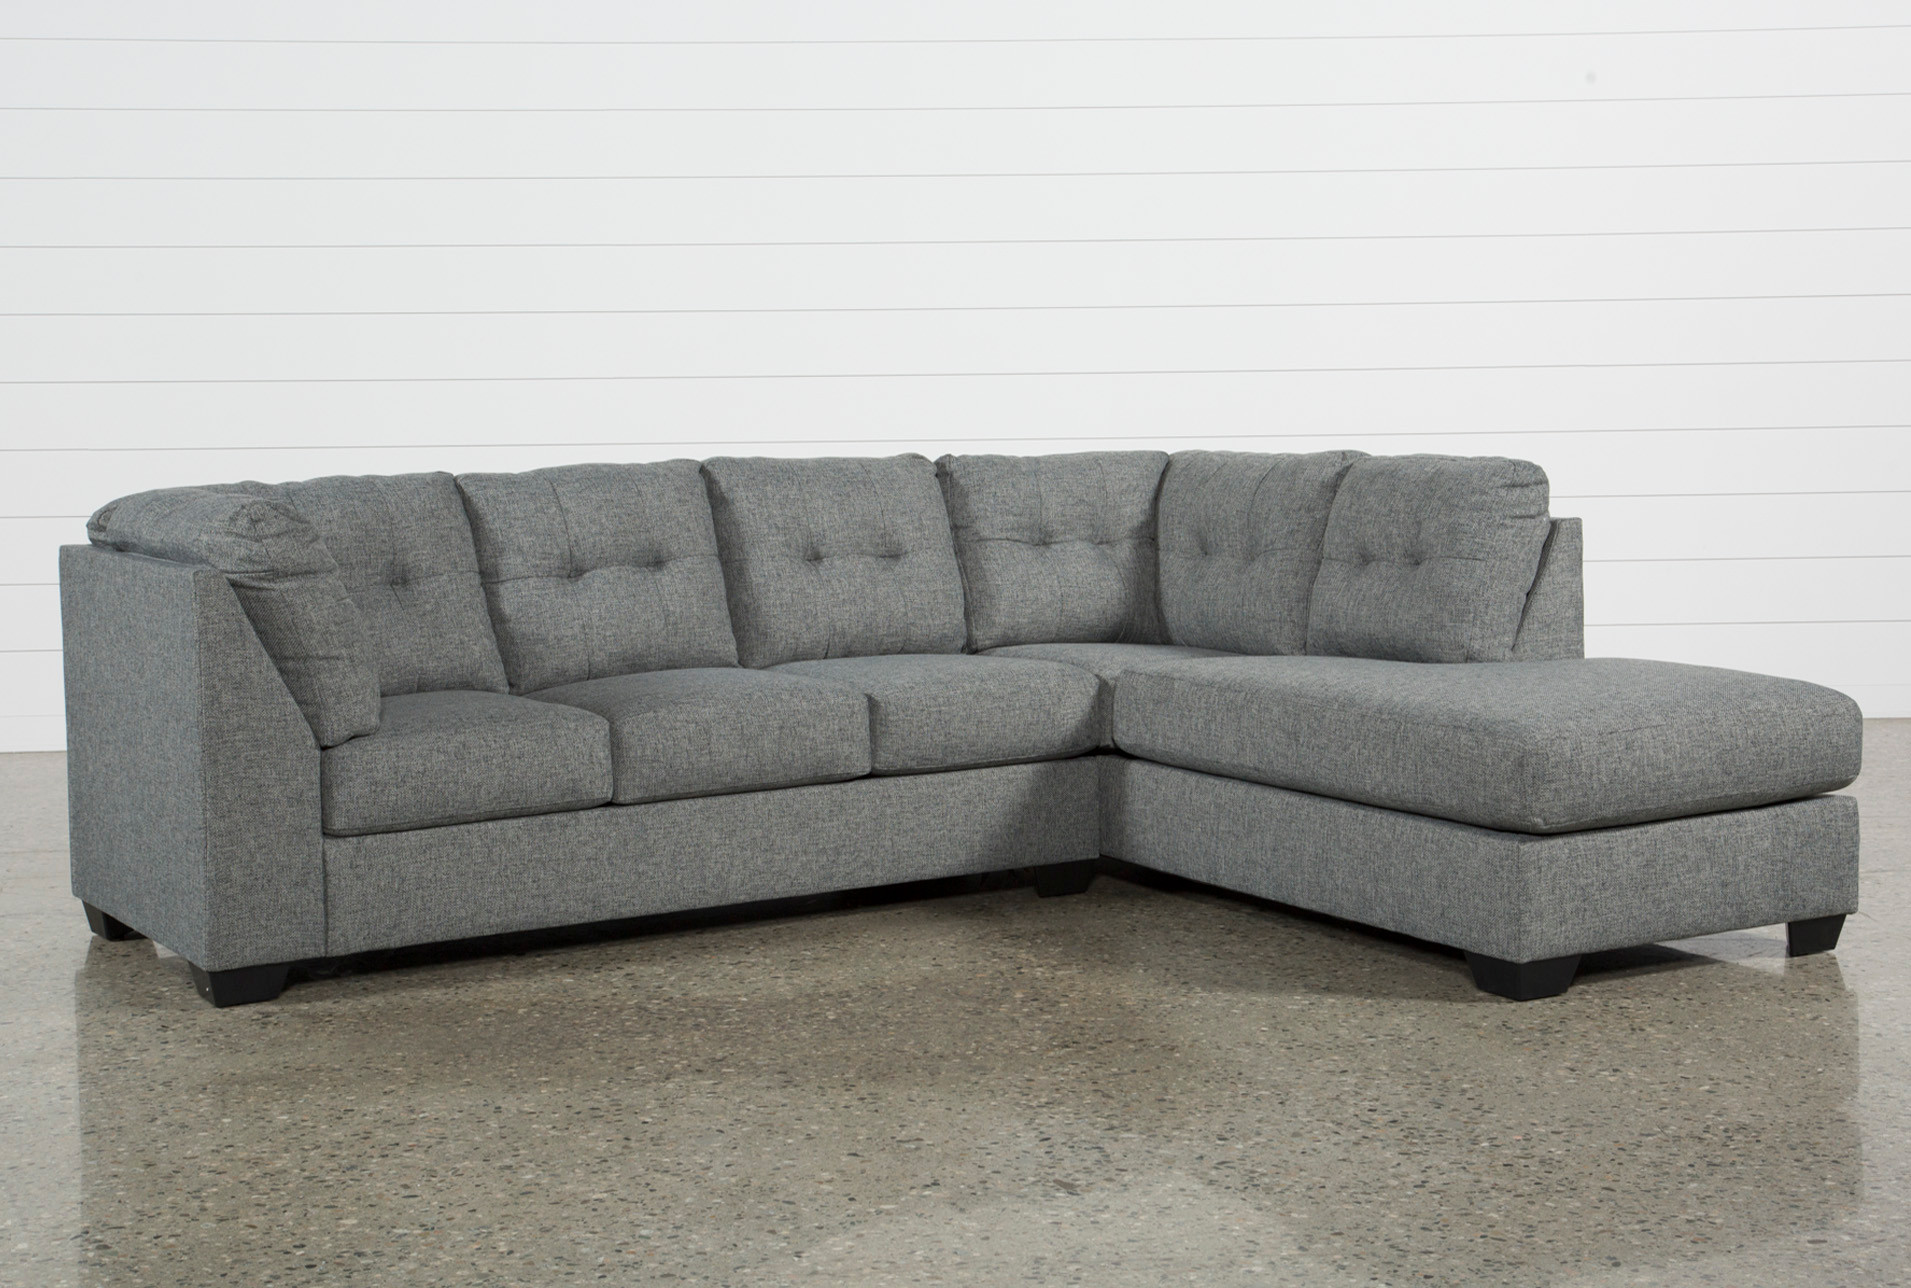 Arrowmask 2 Piece Sectional W/Raf Chaise